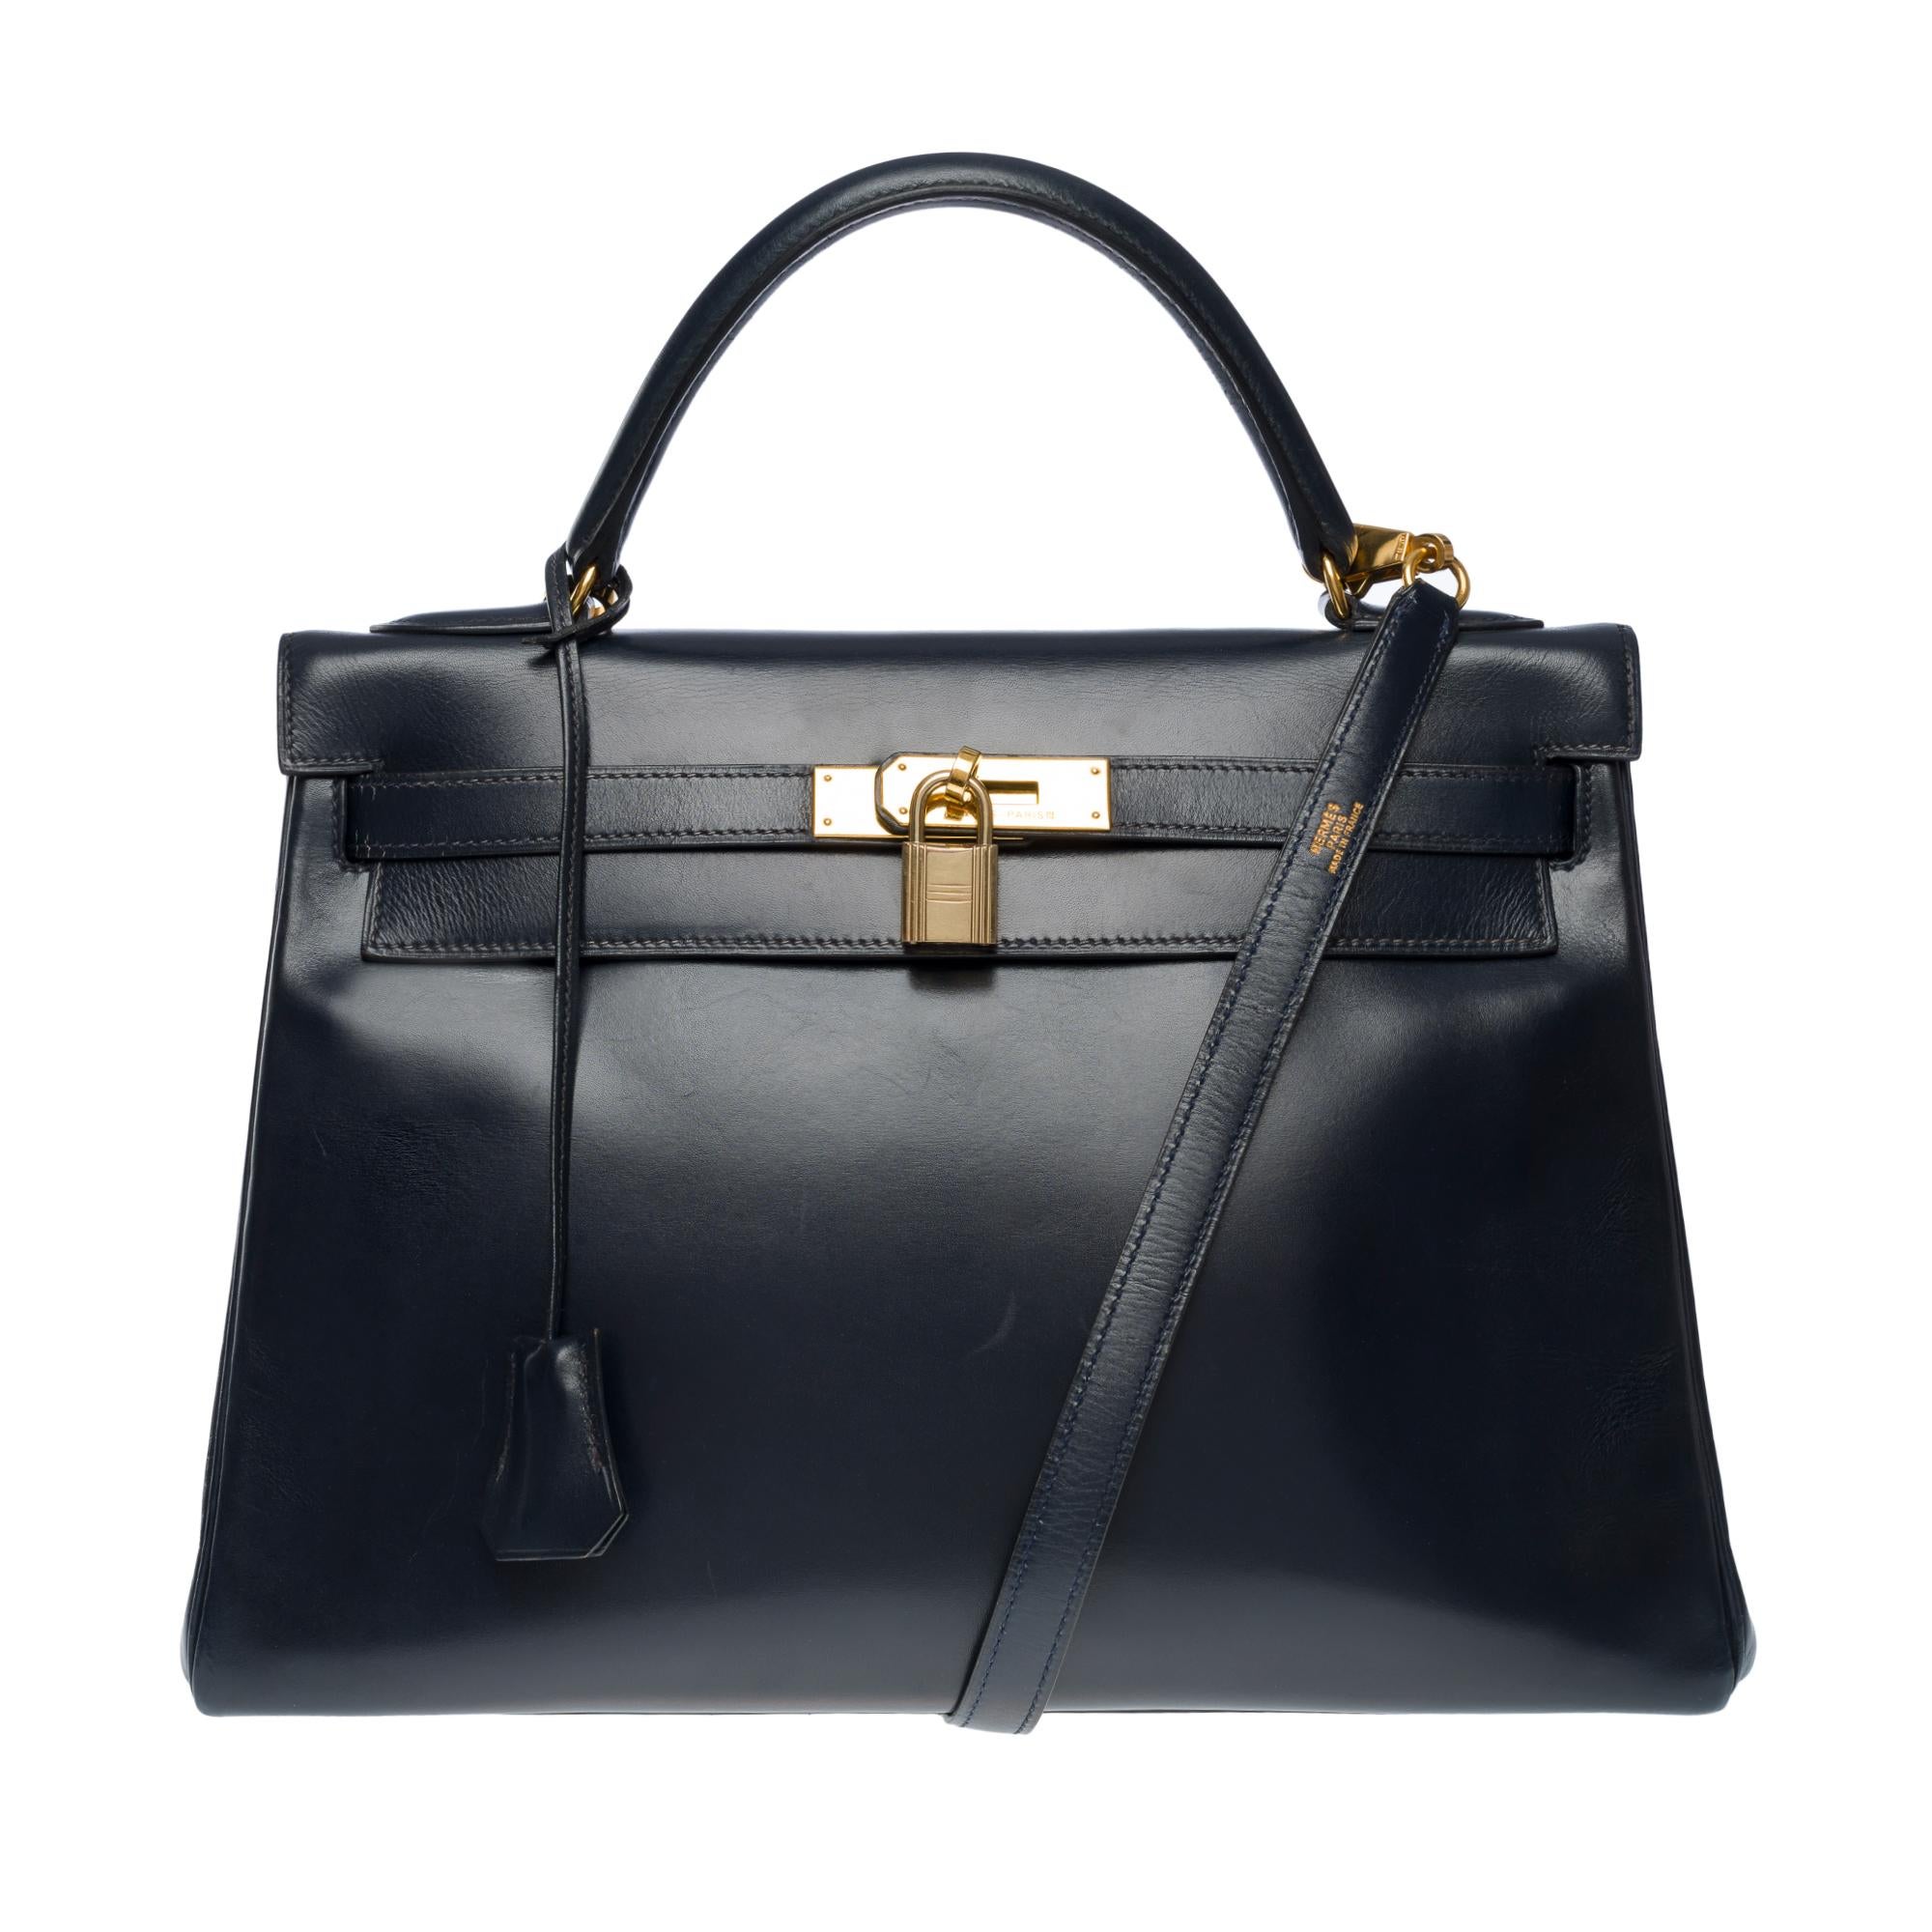 Beautiful Hermes Kelly 32 retourne handbag strap in navy blue box calfskin leather , gold plated metal hardware, navy leather handle, removable shoulder handle in navy leather for hand or shoulder carry

Flap closure
Interior lining in navy leather,